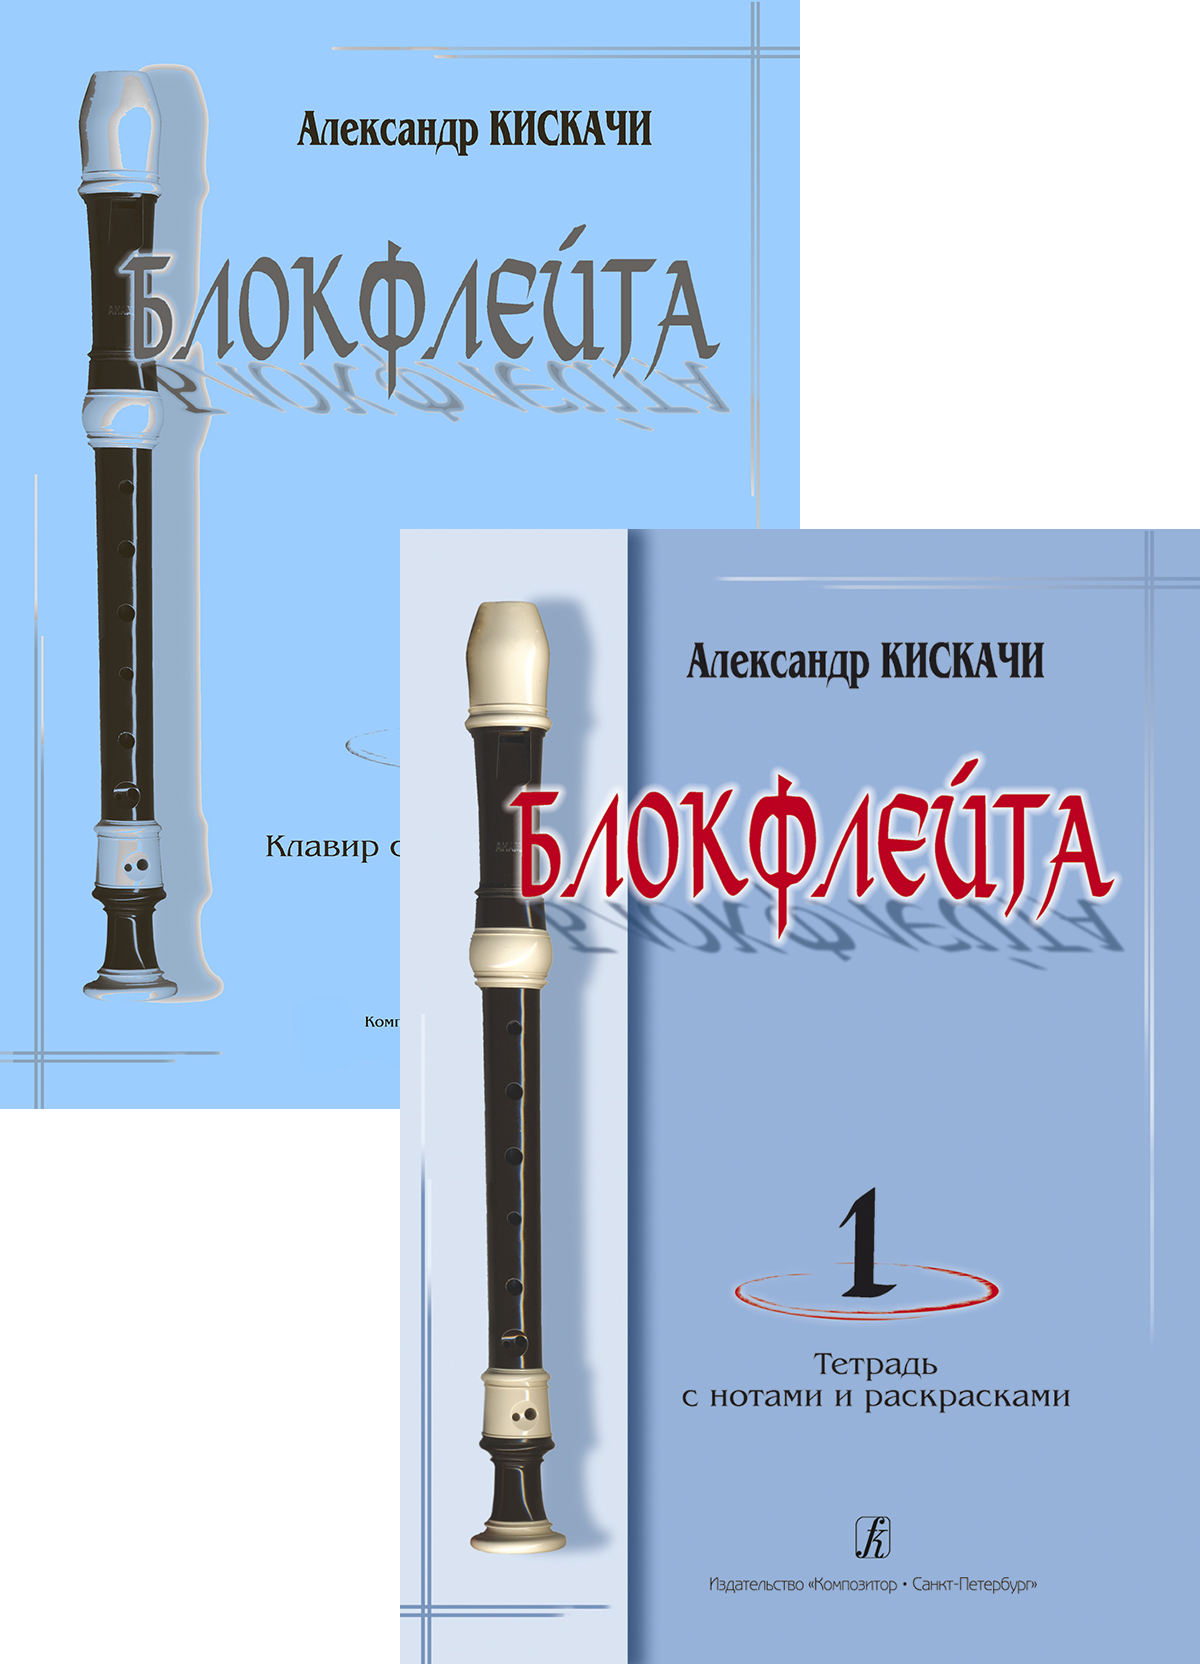 Kiskachi A. Recorder. Vol. 1. School for Beginners. Piano score with commentaries